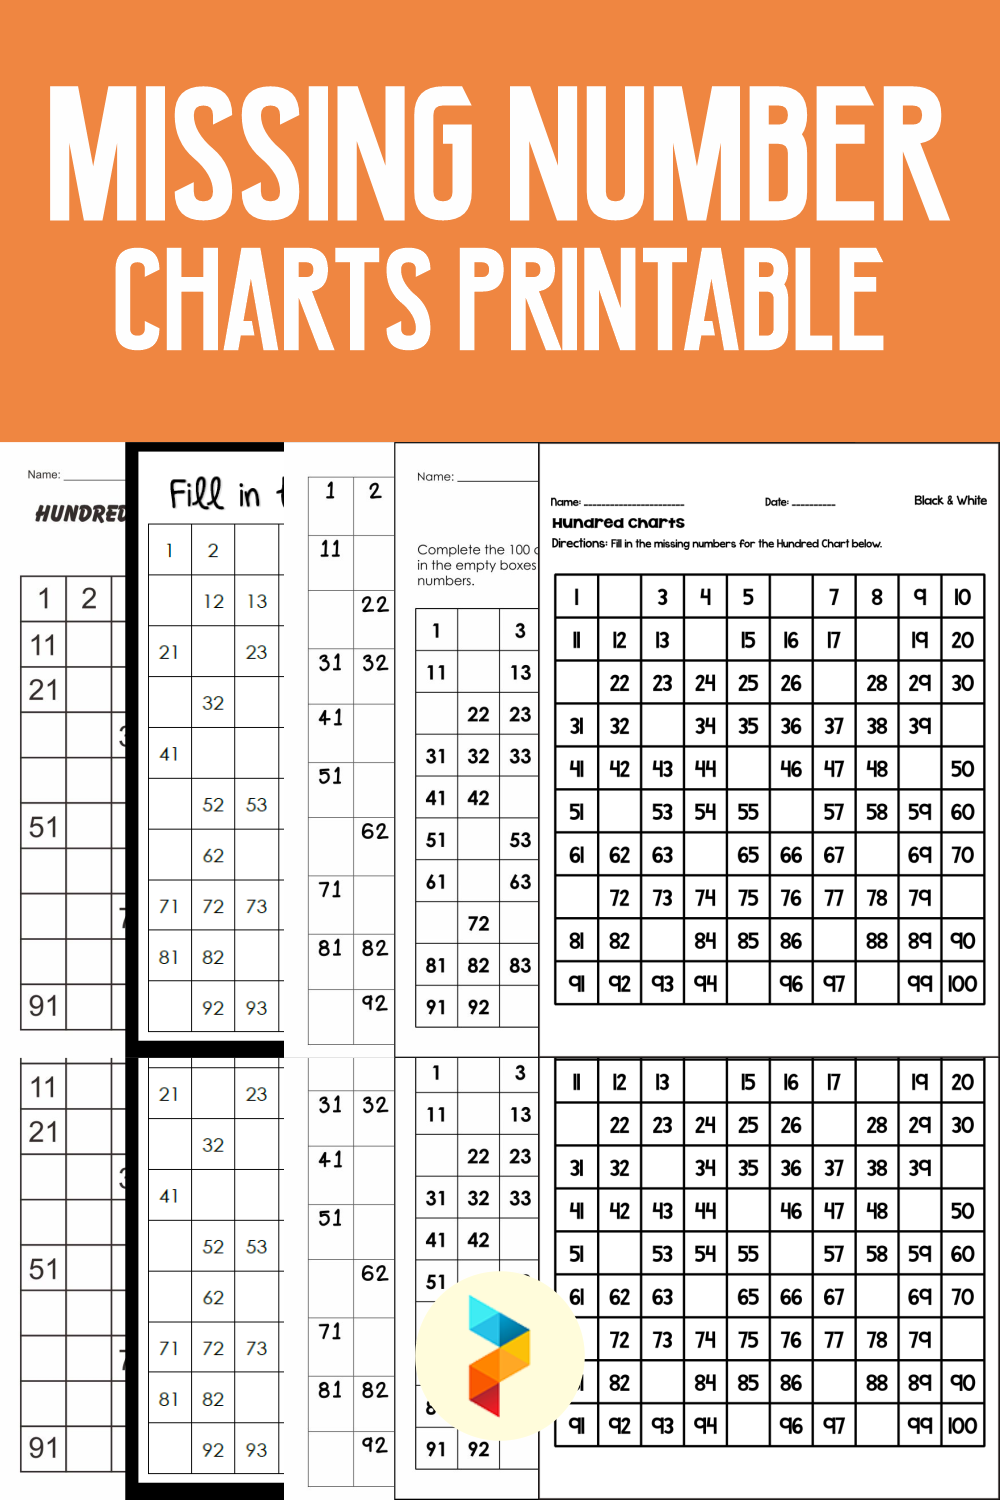 Missing Number Charts Printable